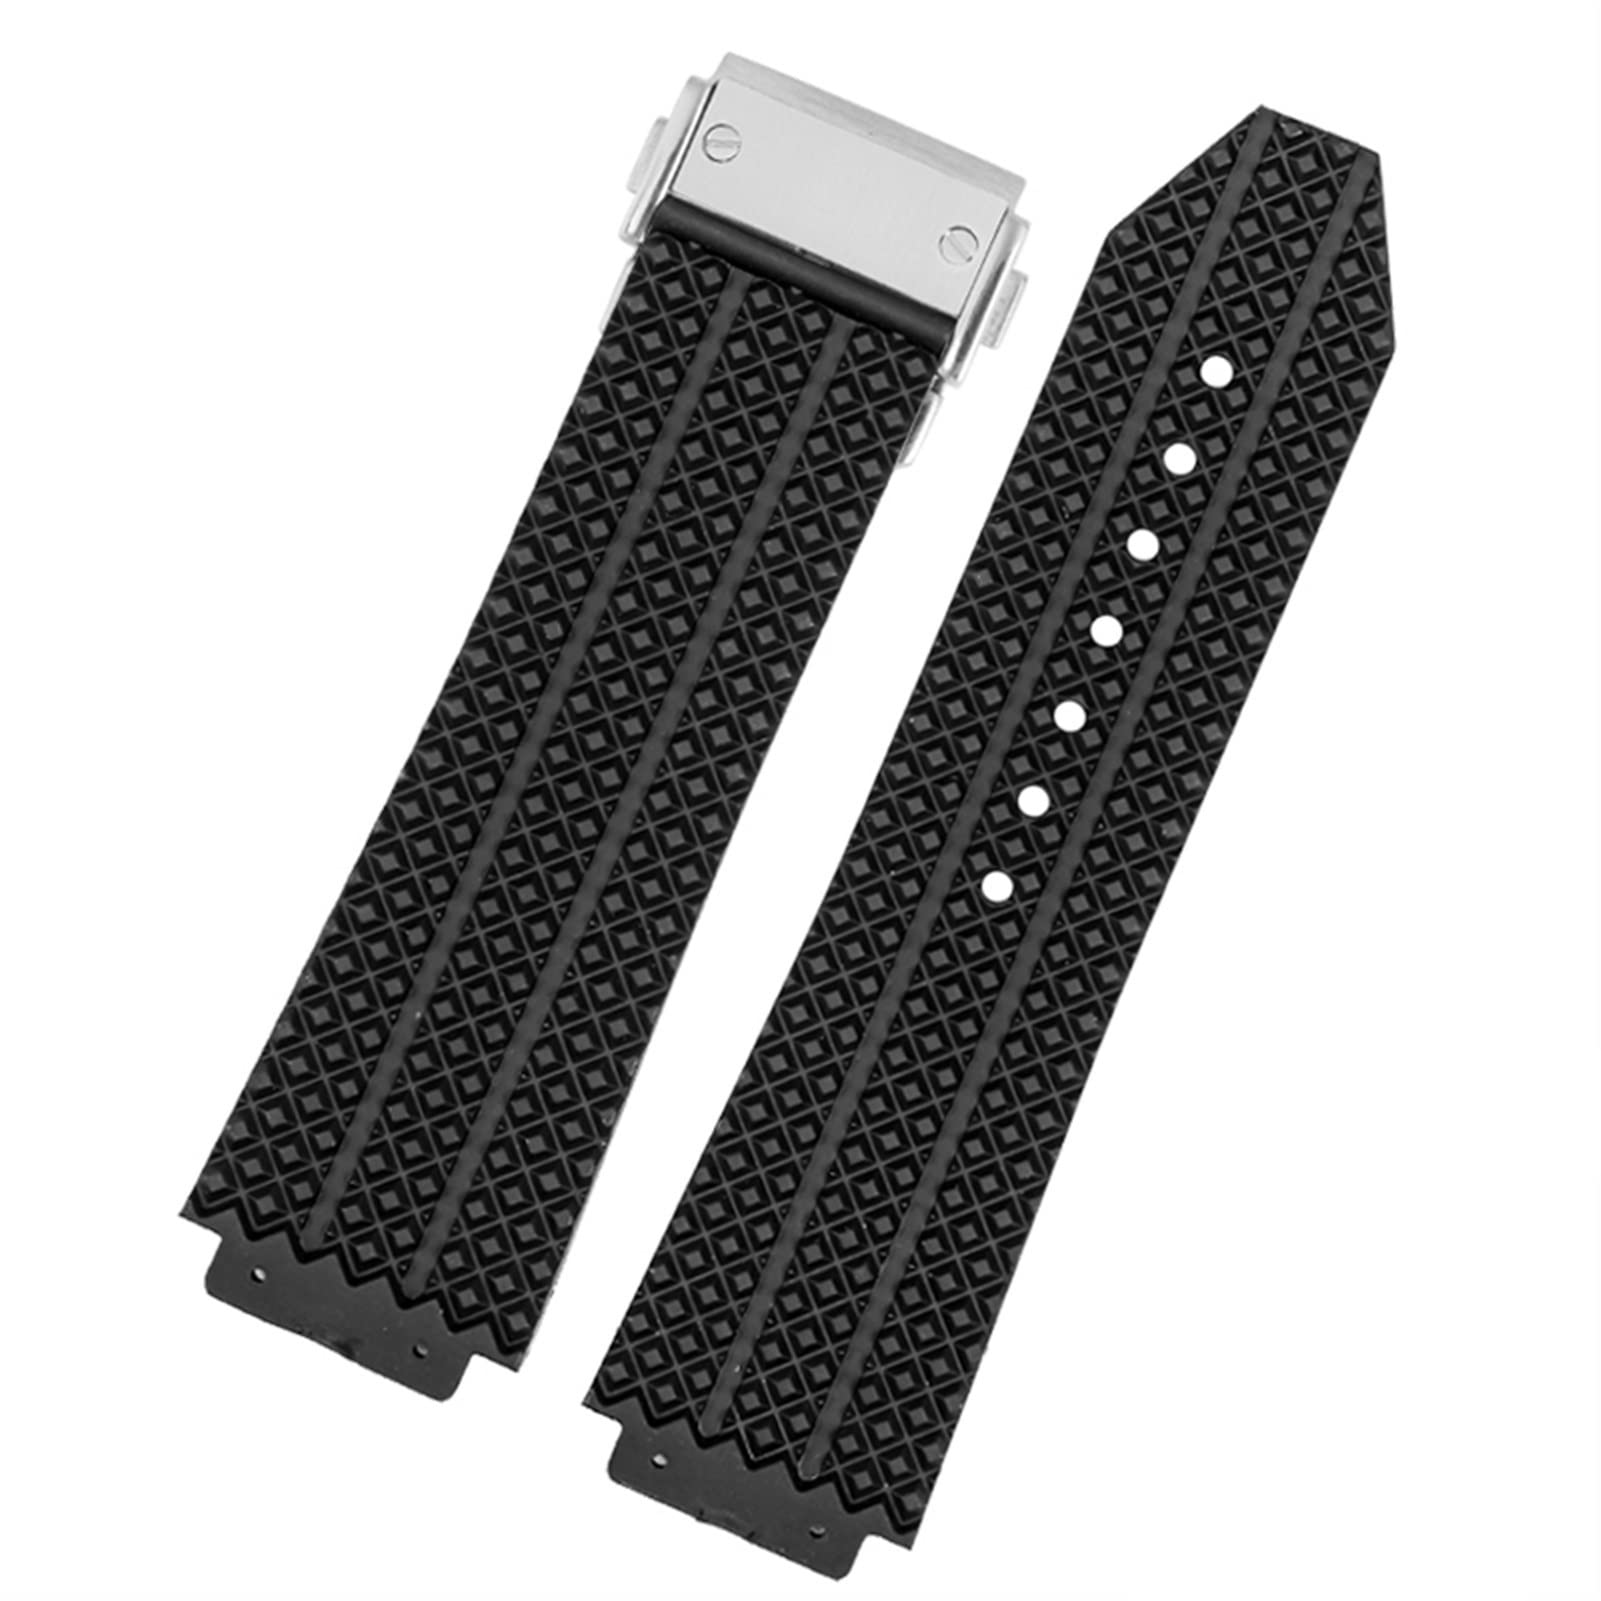 TRDYBSK for HUBLOT Big Bang Silicone Watch Band 26mm*19mm 25mm*17mm Waterproof Watch Strap Watch Rubber Watch Bracelet (Color : 2 Black-Silver, Size : 26-19mm)